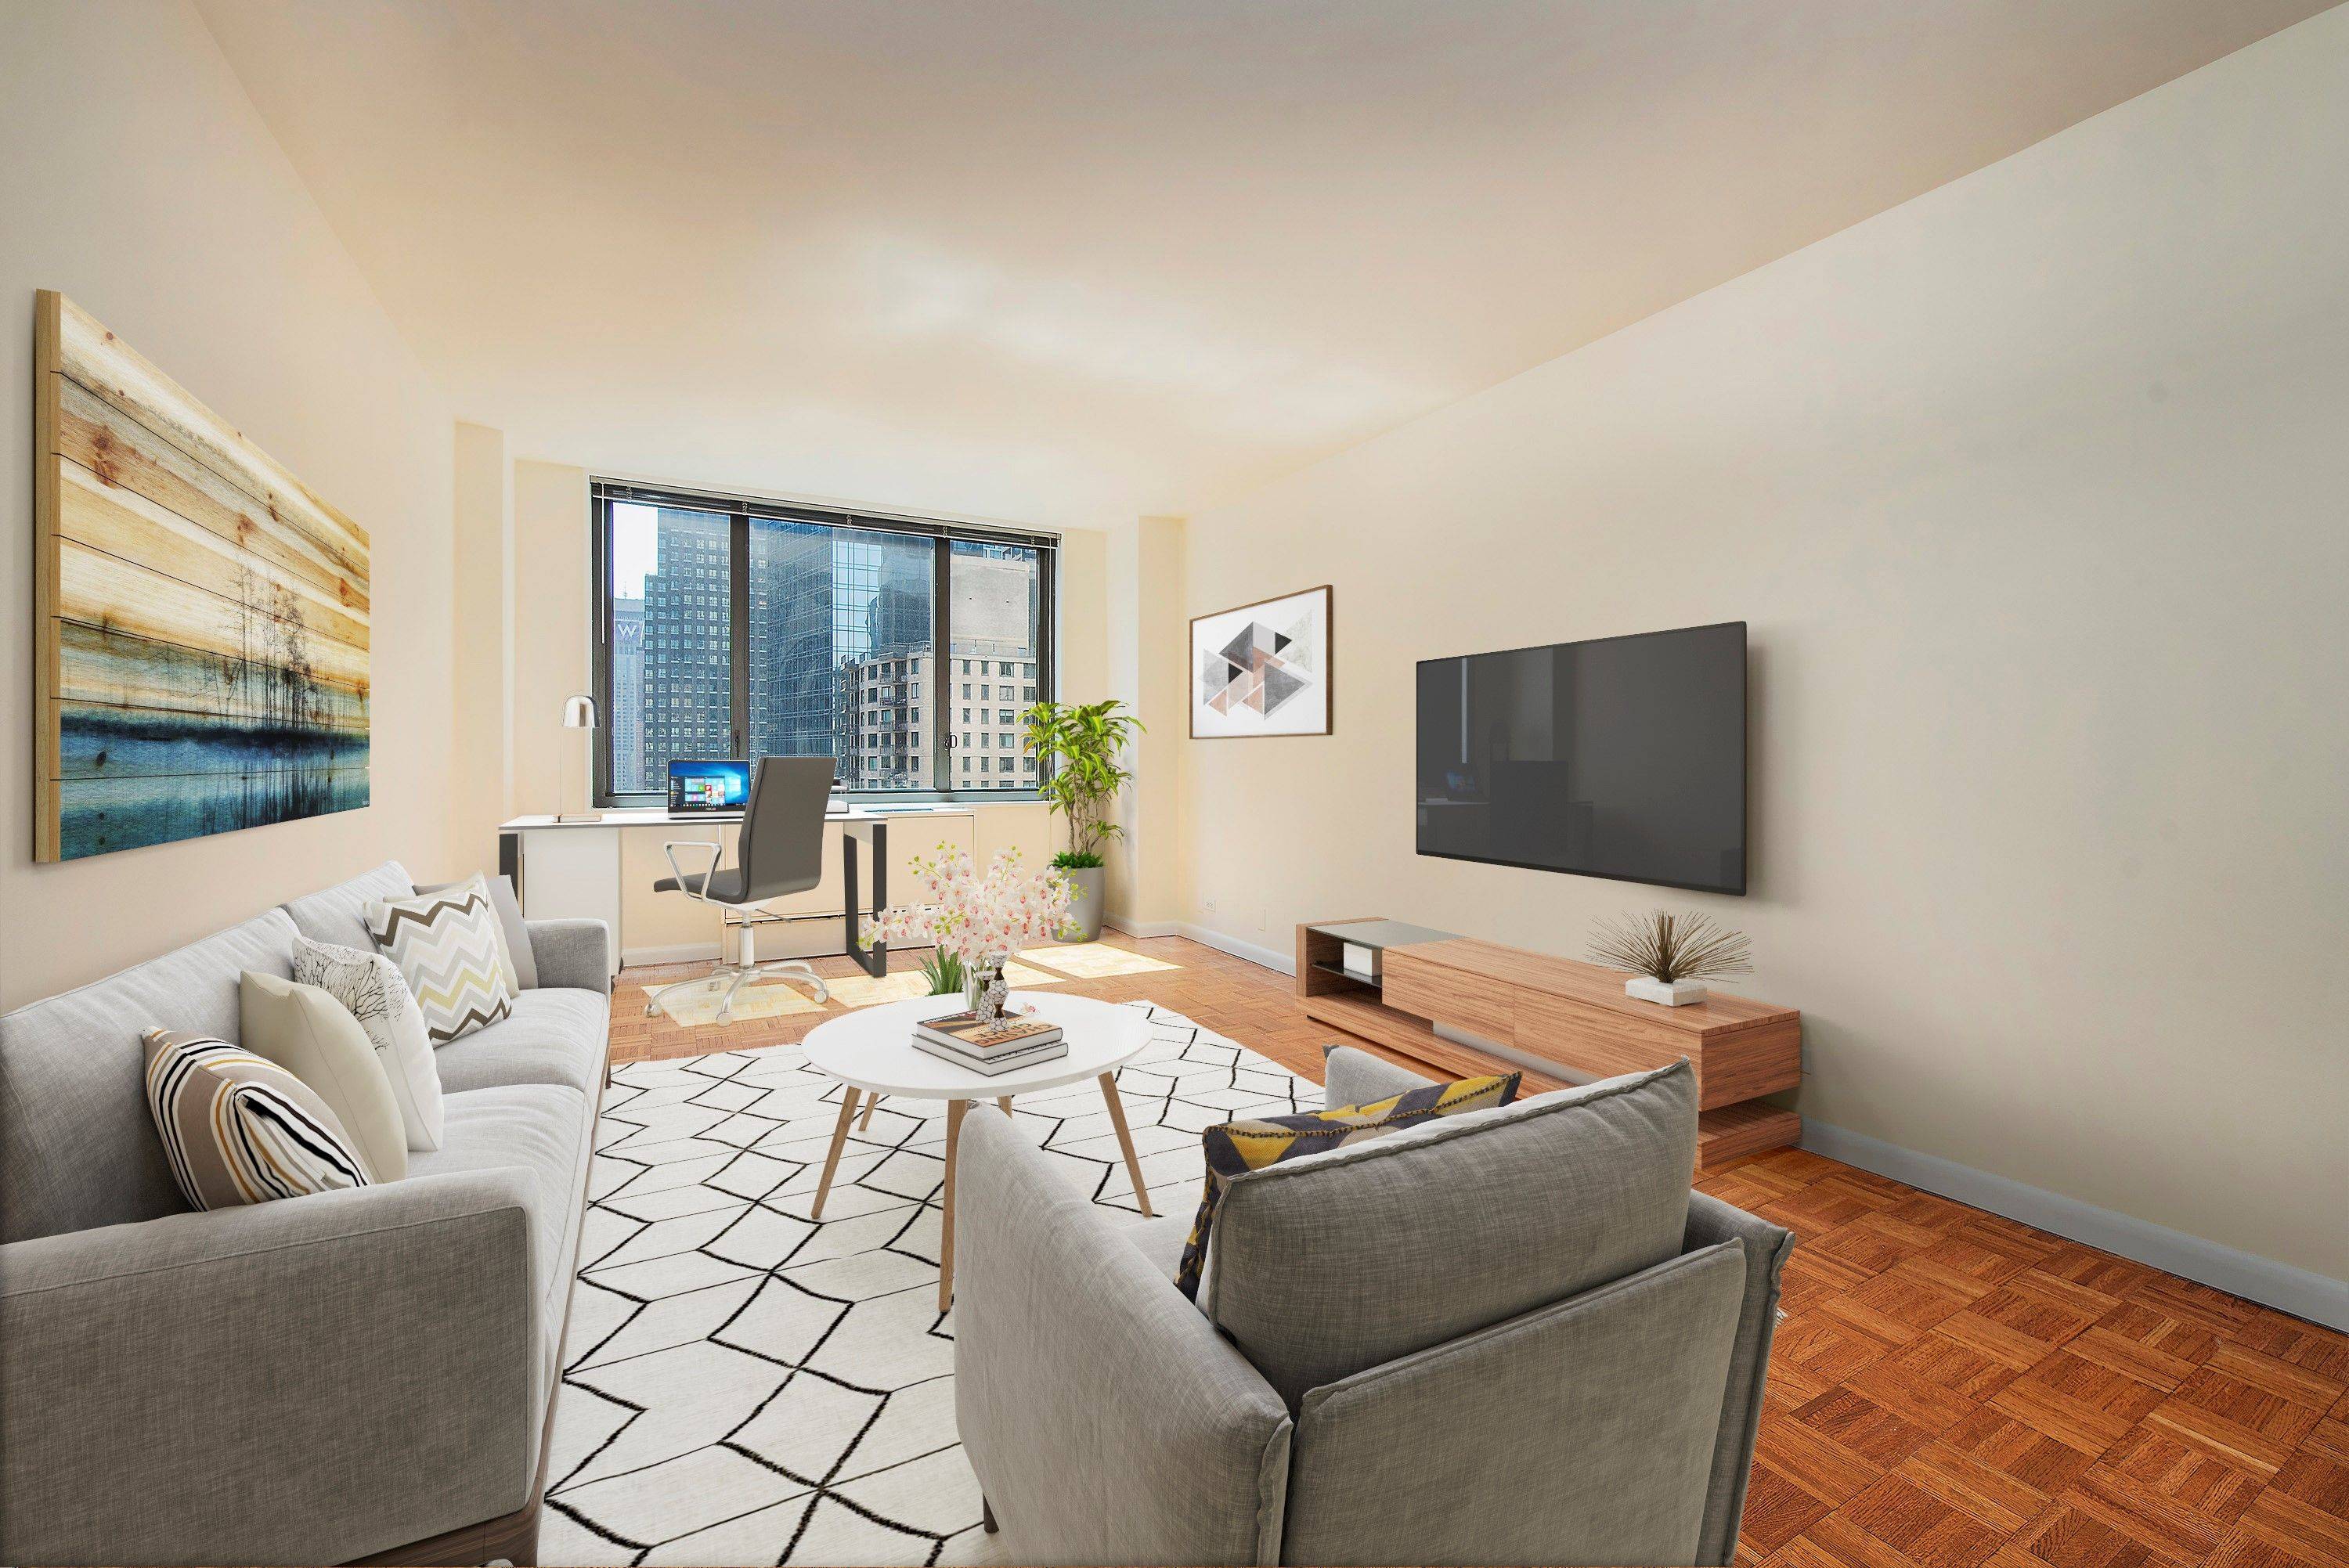 Sunny 1 bed with open views across 56th street, a separate fully equipped kitchen, 4 closets and wood floors throughout.